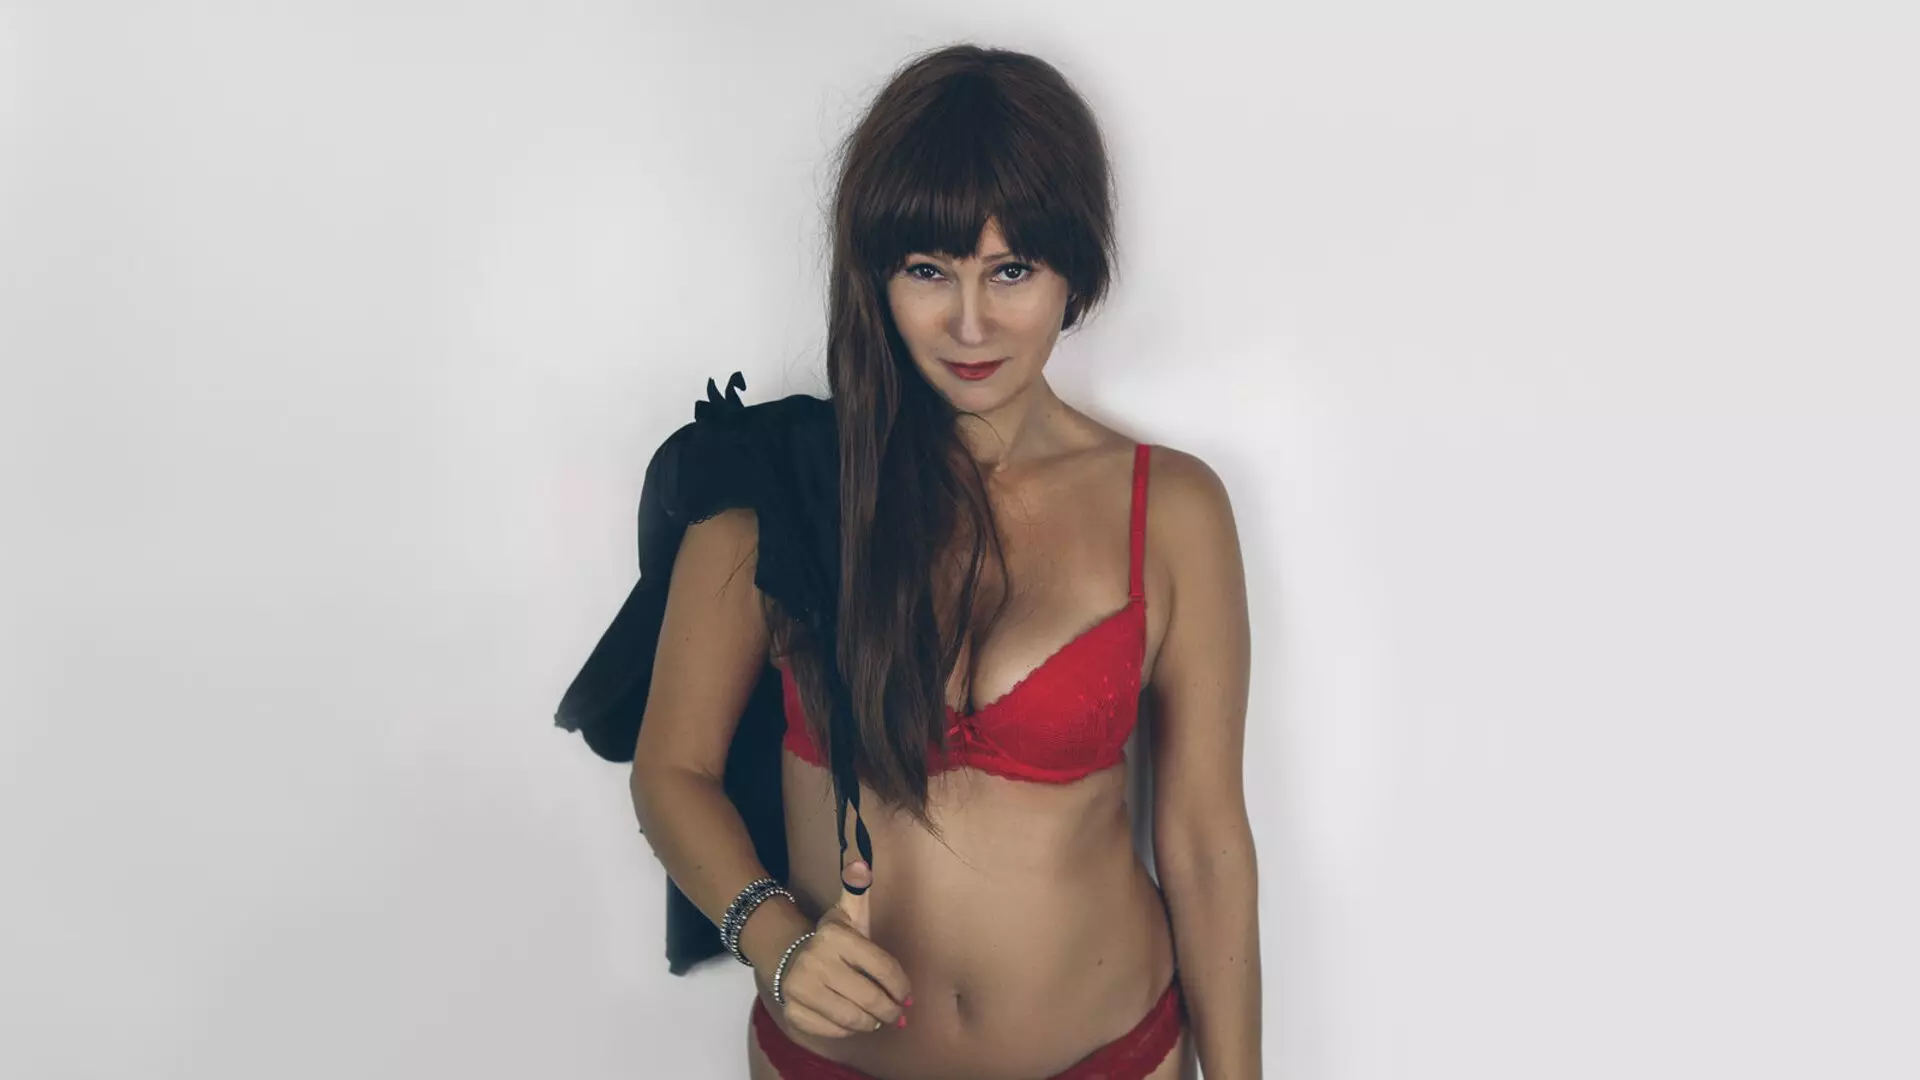 MonikaBrils's Live Nude Chat